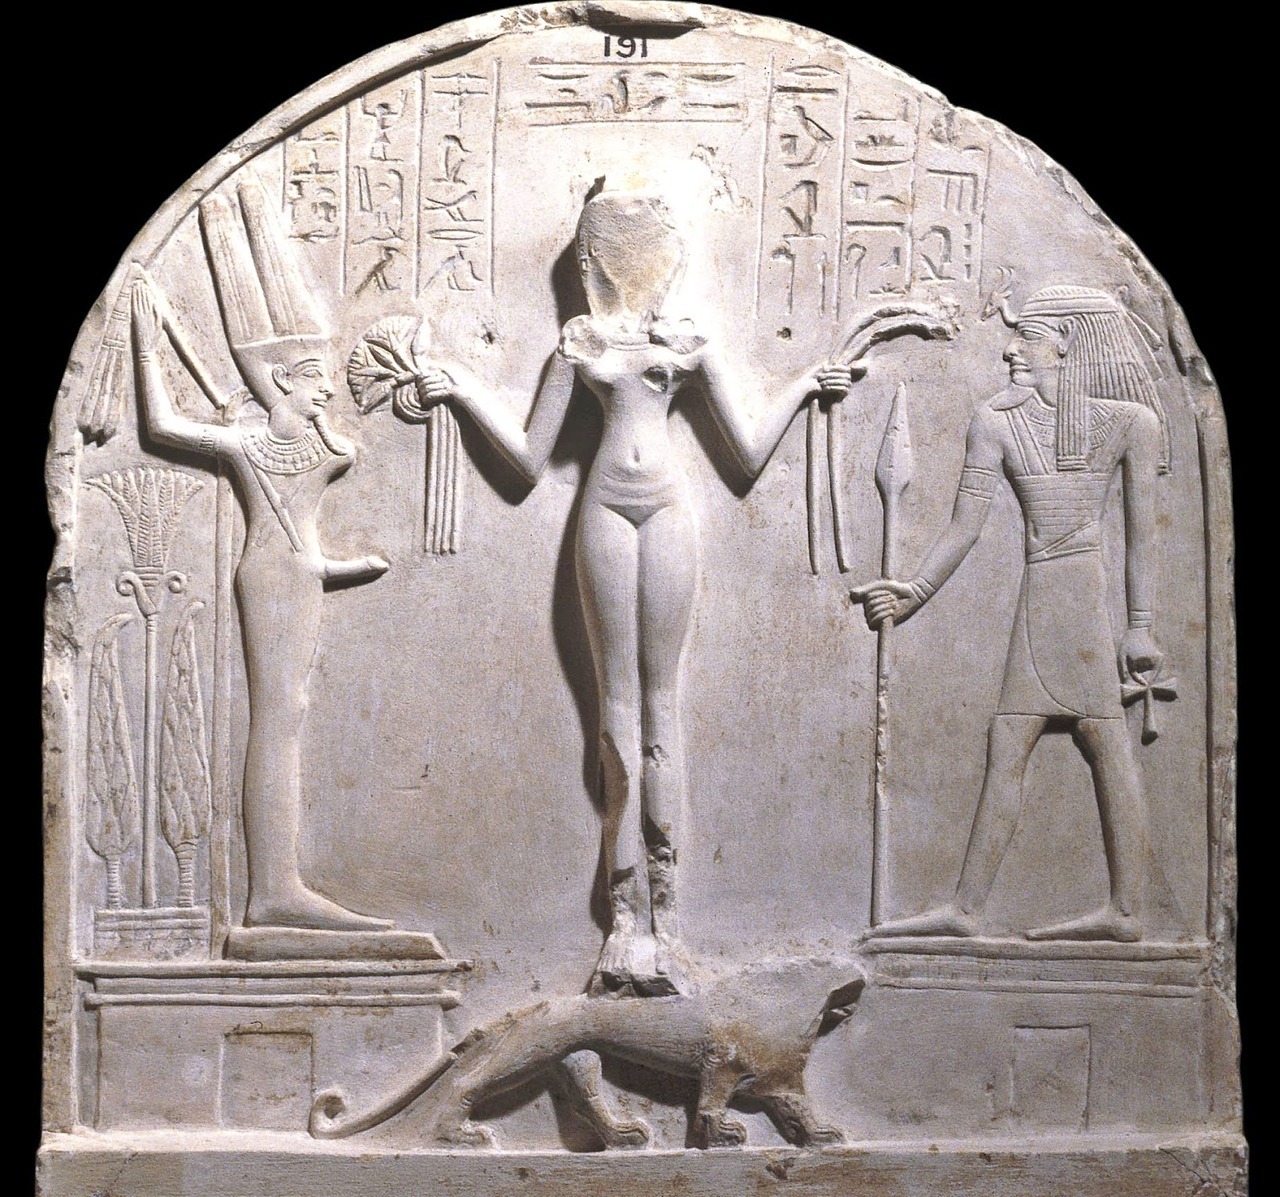 Ancient Egyptian Stele with Fertility GodsUpper register of limestone stele of chief craftsman Qeh, from Deir el-Medina. Naked goddess identified as ‘Qetesh, lady of heaven’, standing on a lion, flanked by the ithyphallic Egyptian god Min and...